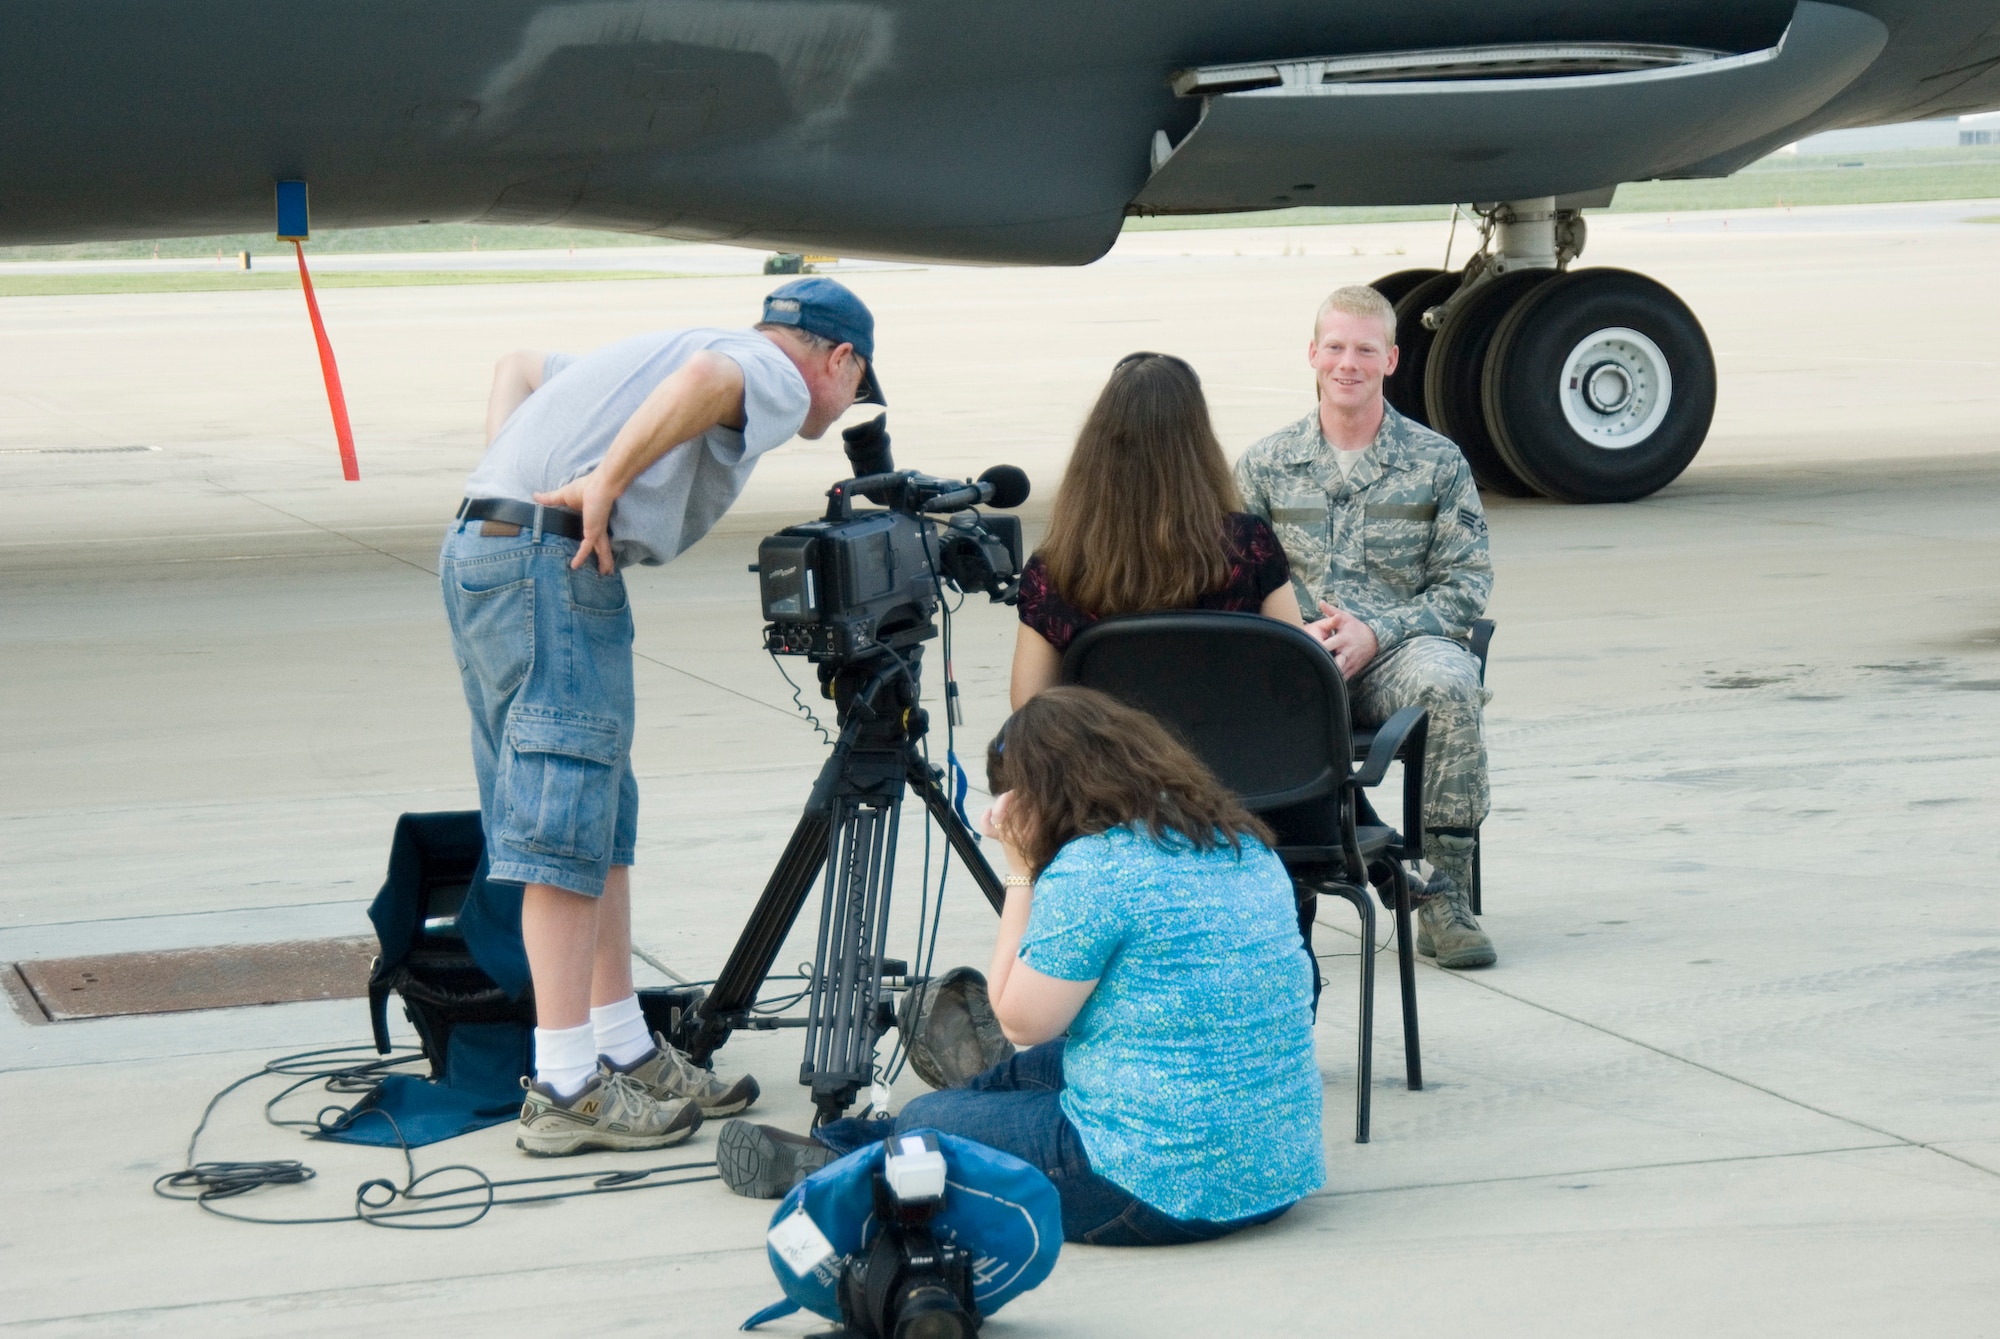 West Virginia University's Television Productions film crew conducts an interview with Senior Airman Nathan Sisler  at the 167th Airlift Wing, Martinsburg, West Virginia, on August 27, 2009. Sisler, a WVU senior and a West Virginia Airman of the Year recipient for 2009, was chosen to be featured in a new recruiting video for WVU because of his leadership qualities according to Kelly Heasley, special projects prouducer for WVU's Television Productions. (U.S. Air Force Photo by Emily Beightol-Deyerle)